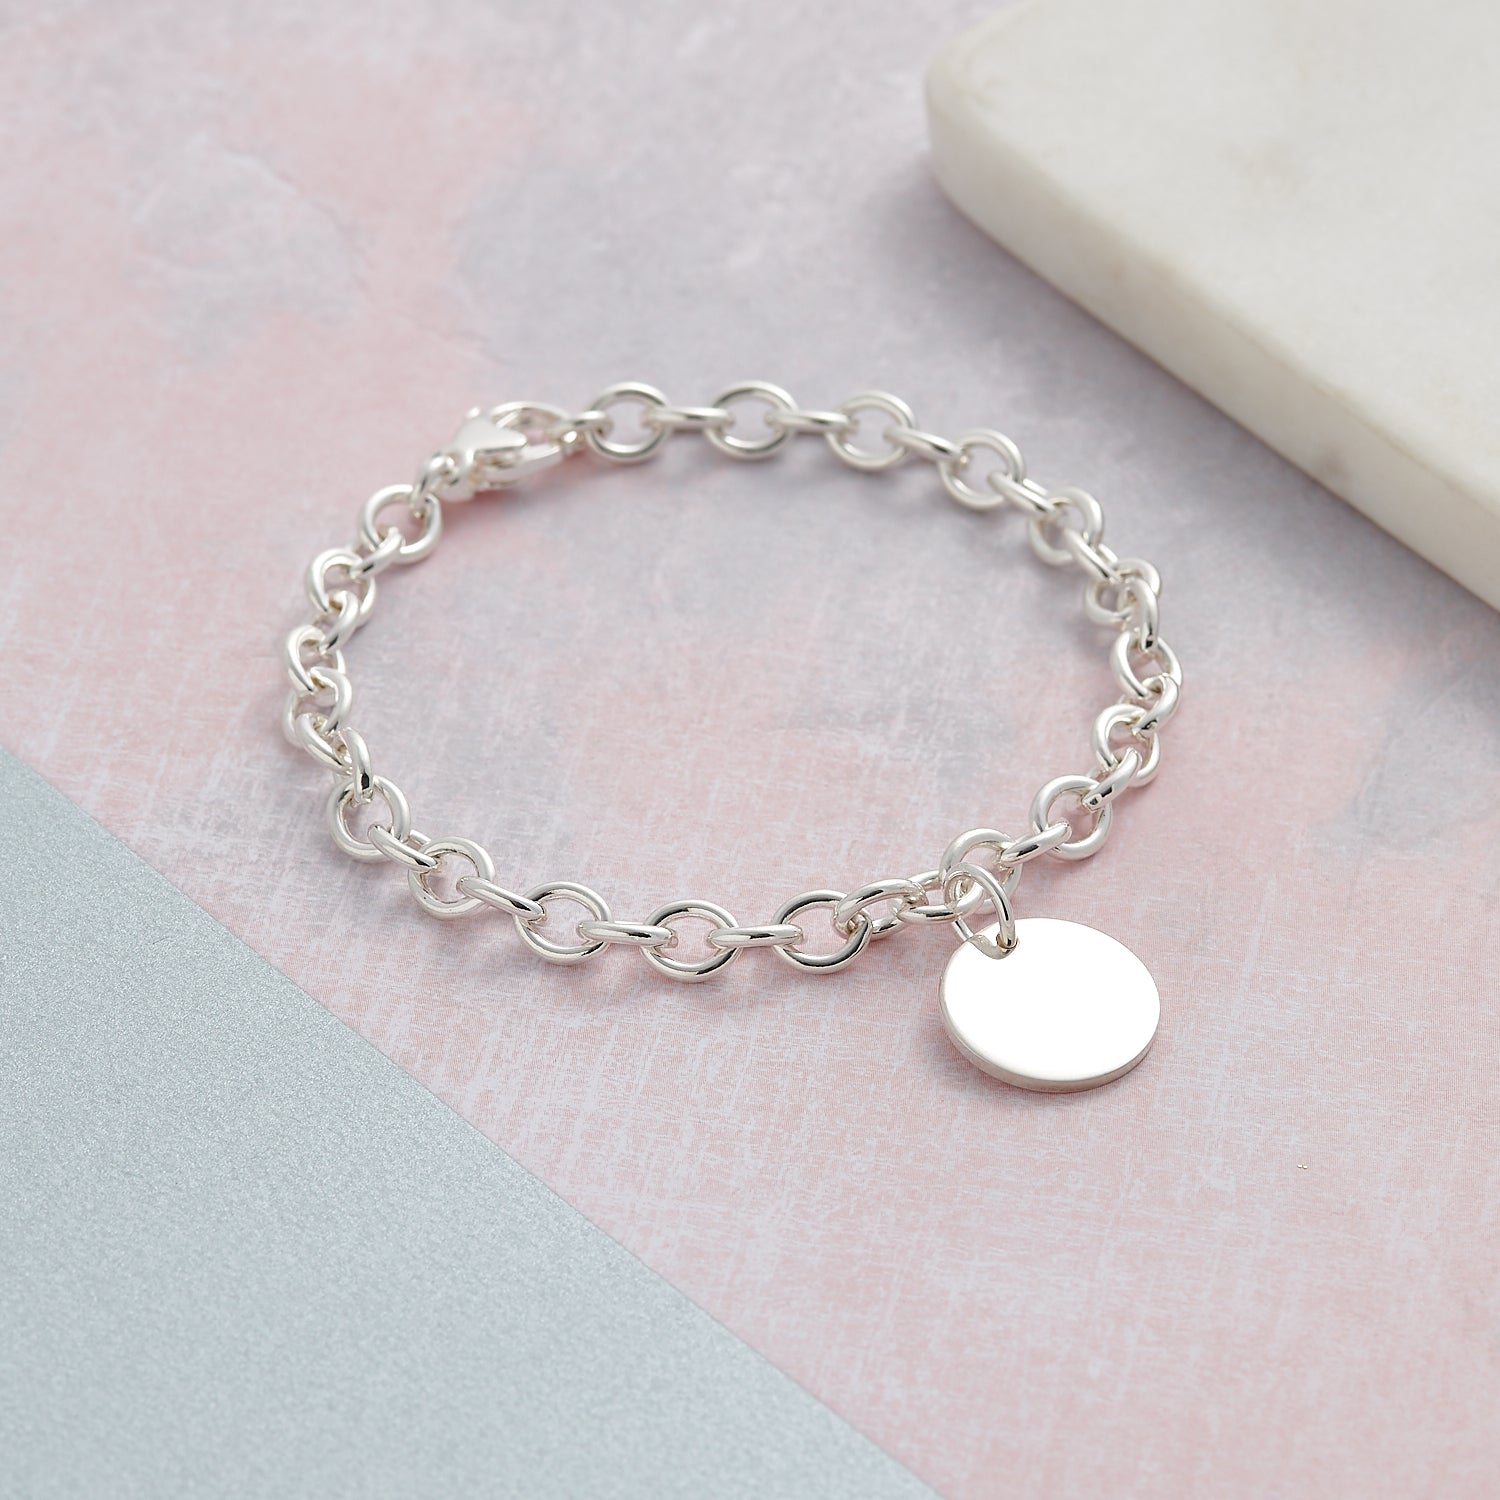 silver personalised disc charm bracelet engraved thank you gift